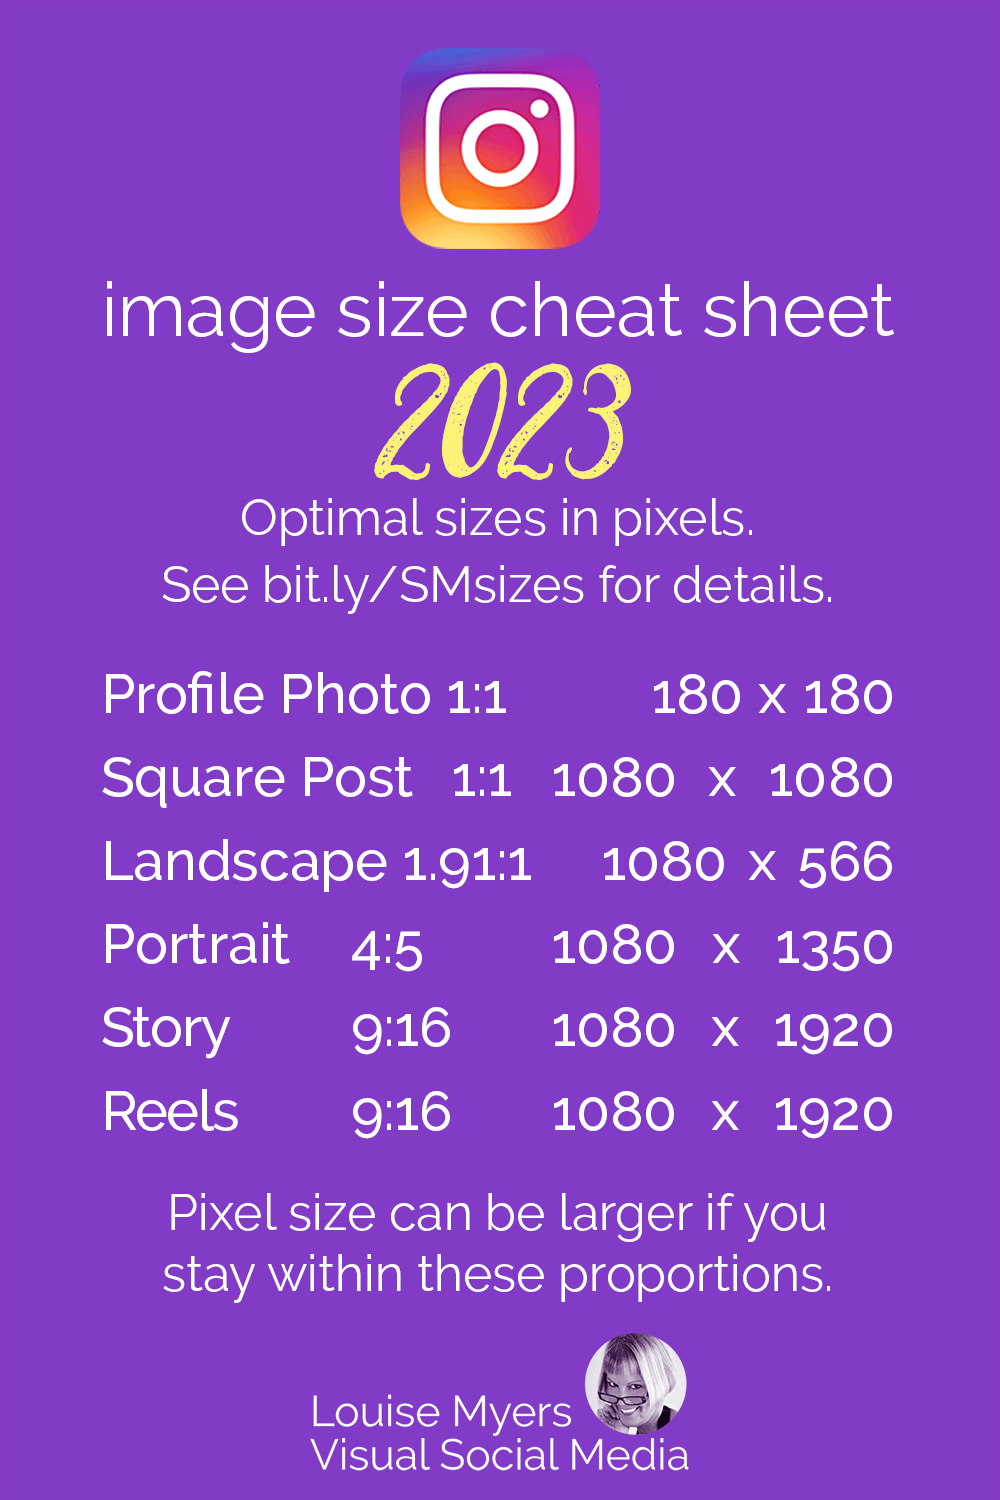 Instagram image sizes chart on purple graphic with IG logo.